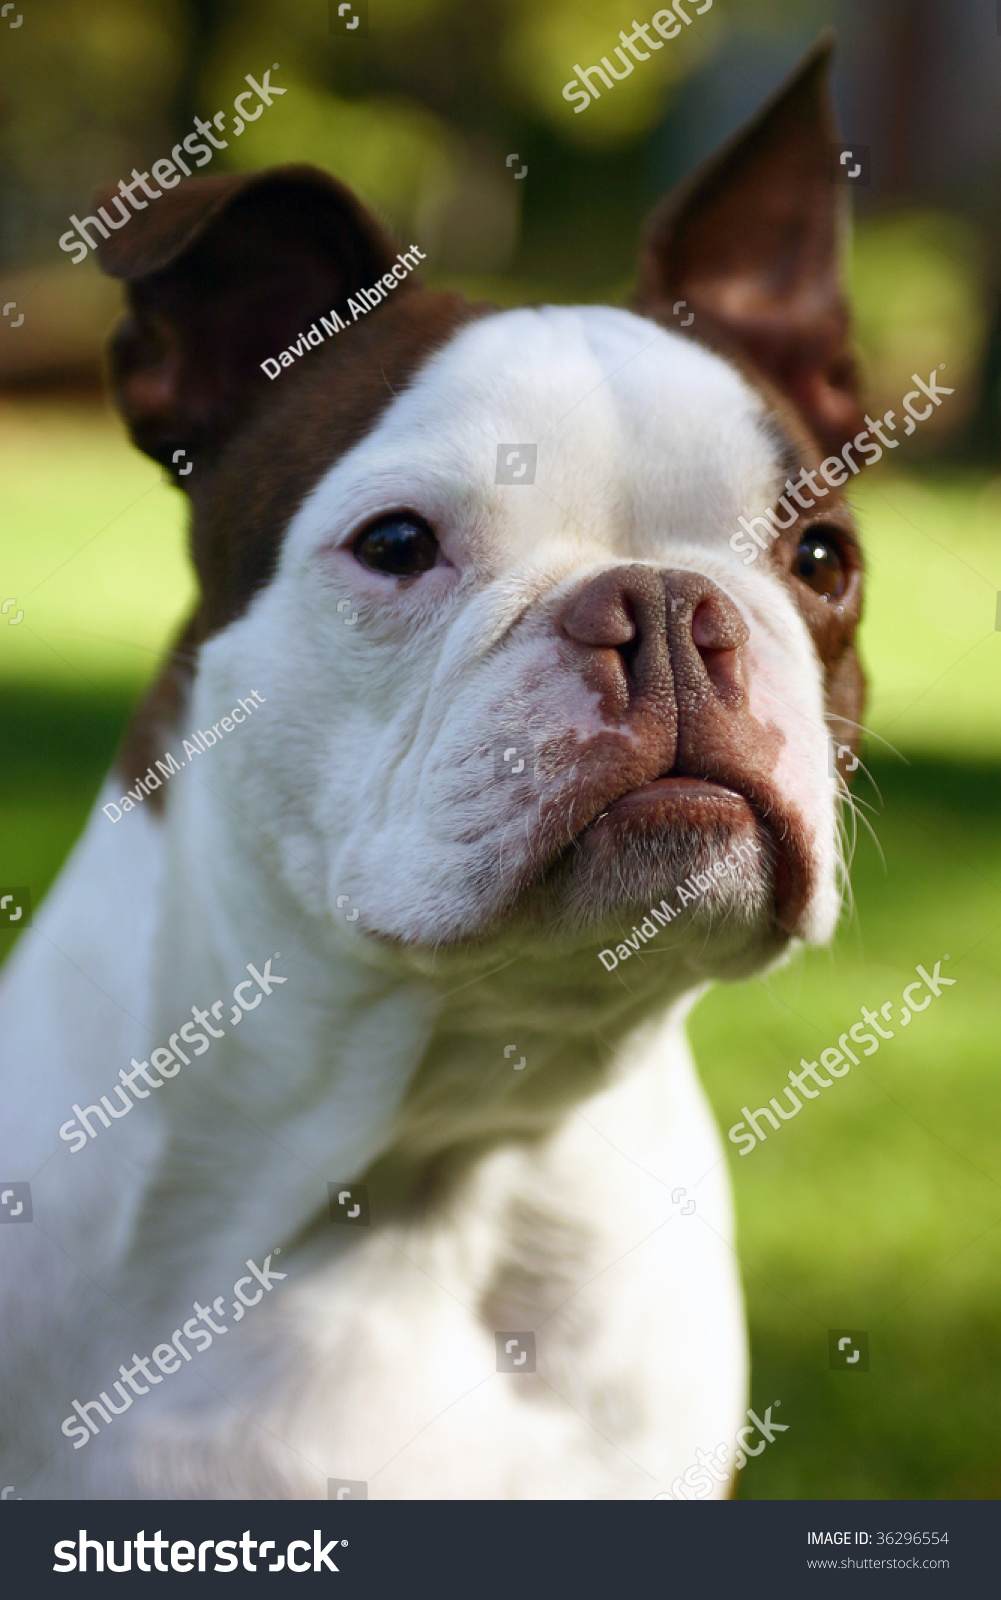 What is a brown Boston terrier?